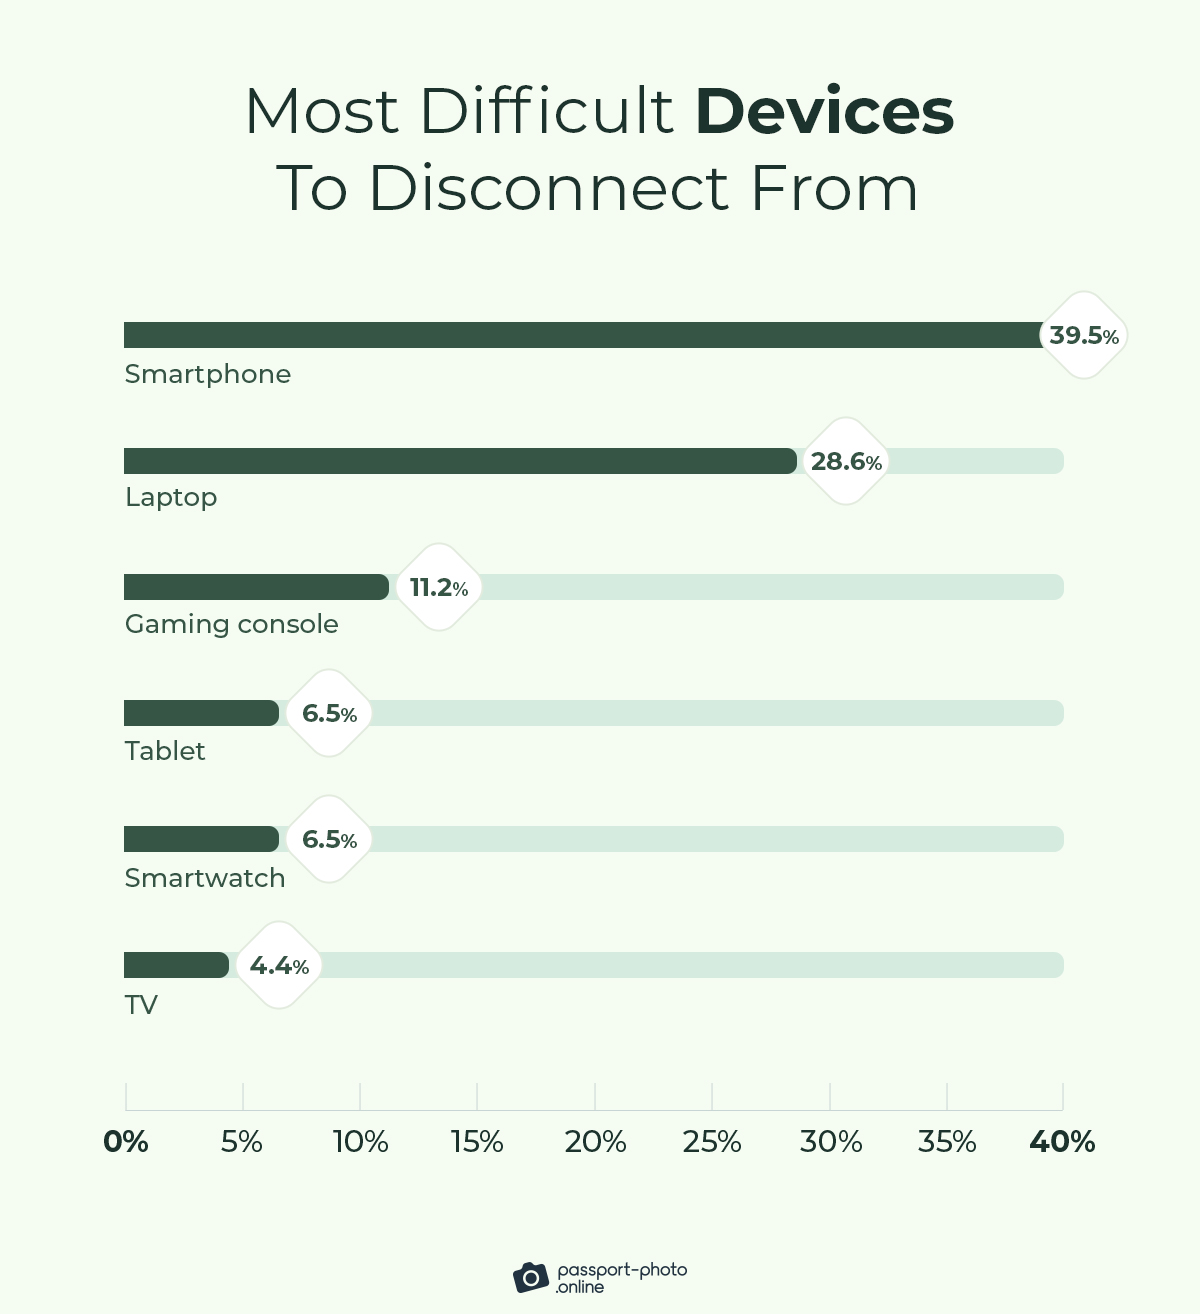 the smartphone was voted the most challenging device to disconnect from, with 40% of the vote